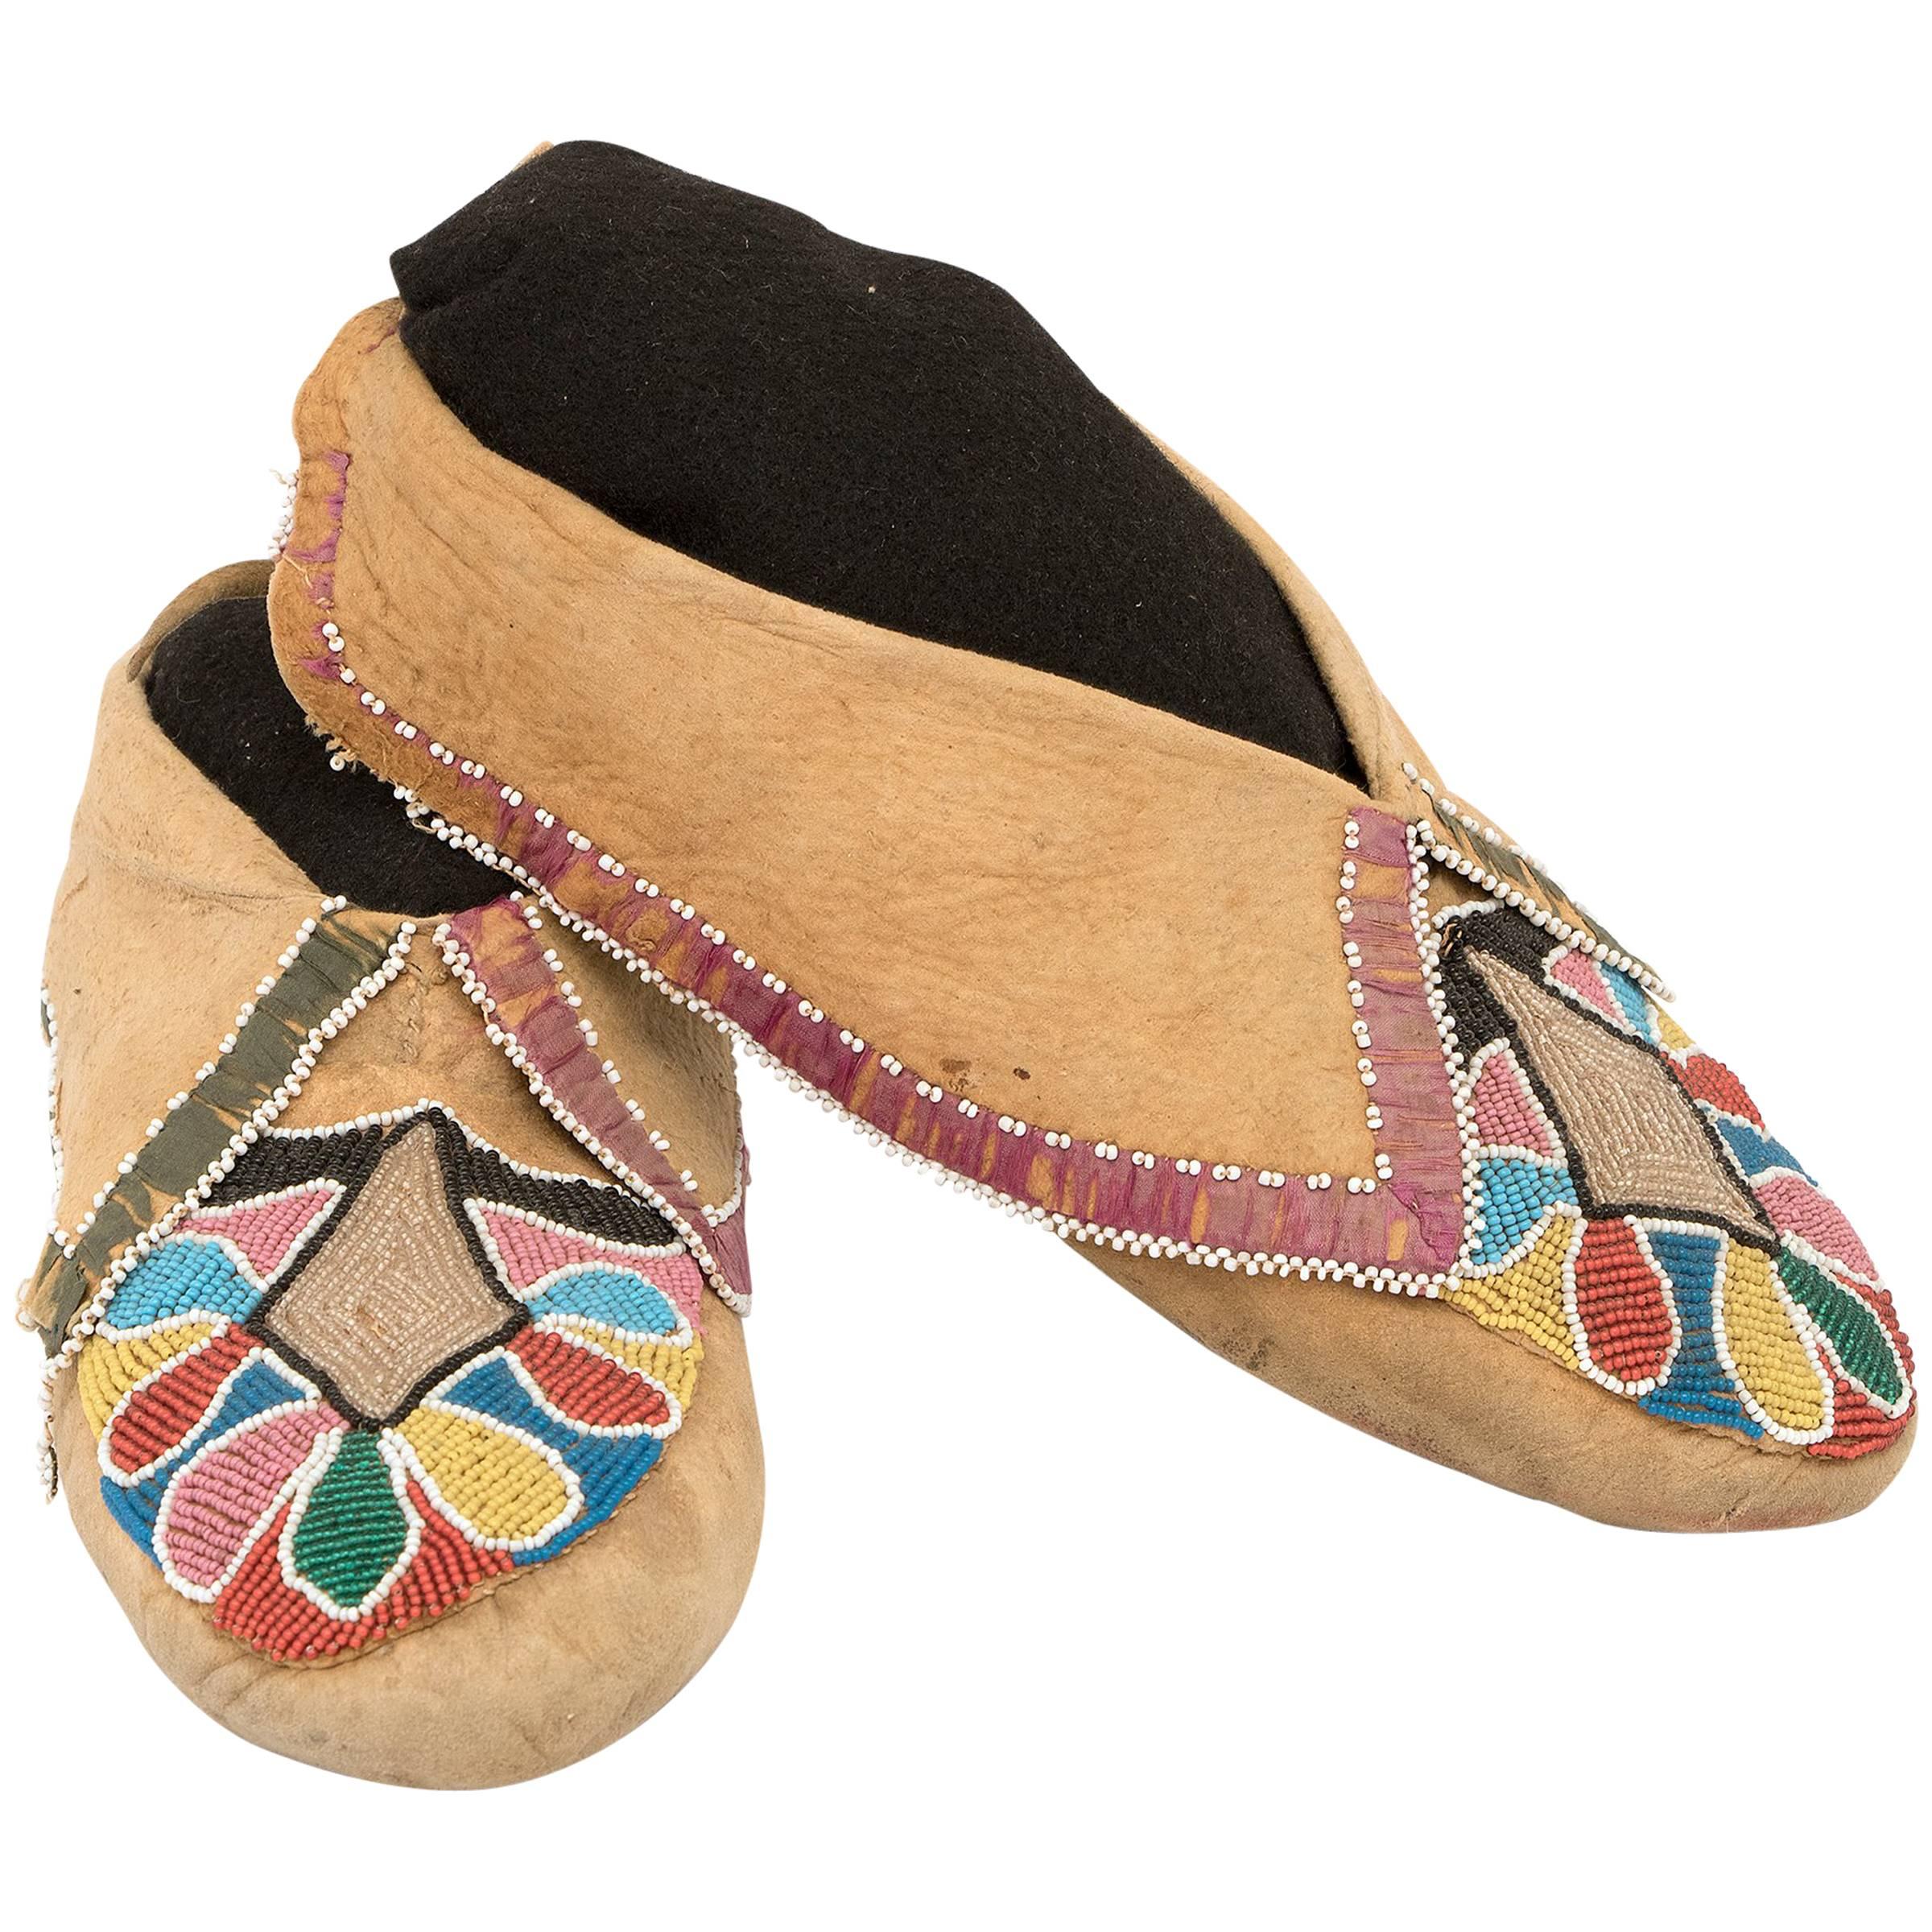 Very Early Pair of Beaded Moccasins, Prairie "Woodlands", circa 1850